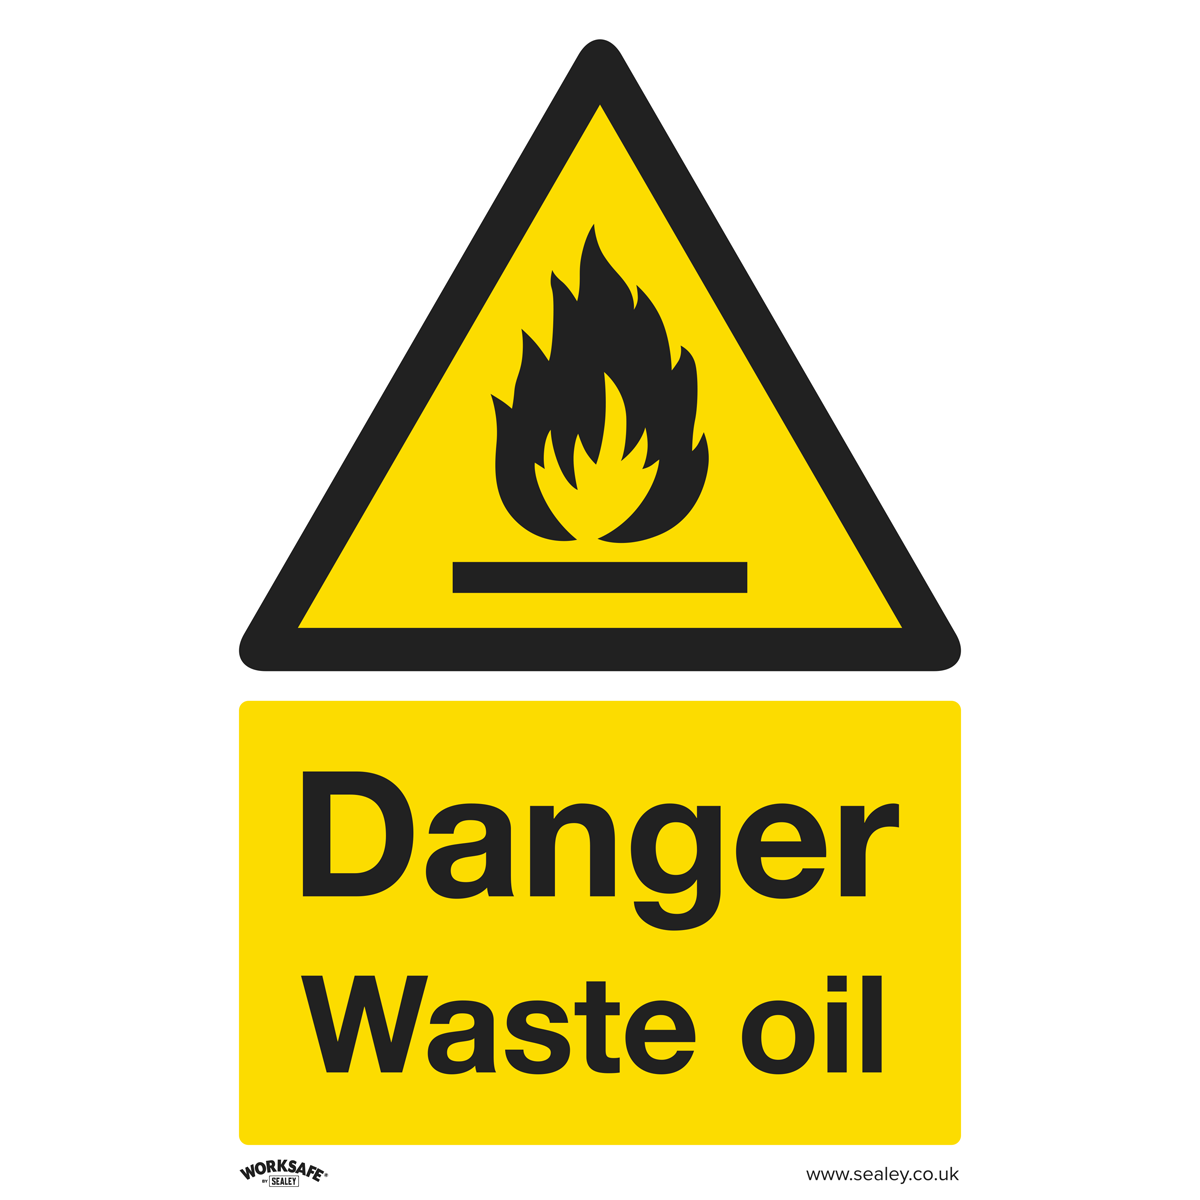 Warning Safety Sign - Danger Waste Oil - Rigid Plastic - SS60P1 - Farming Parts